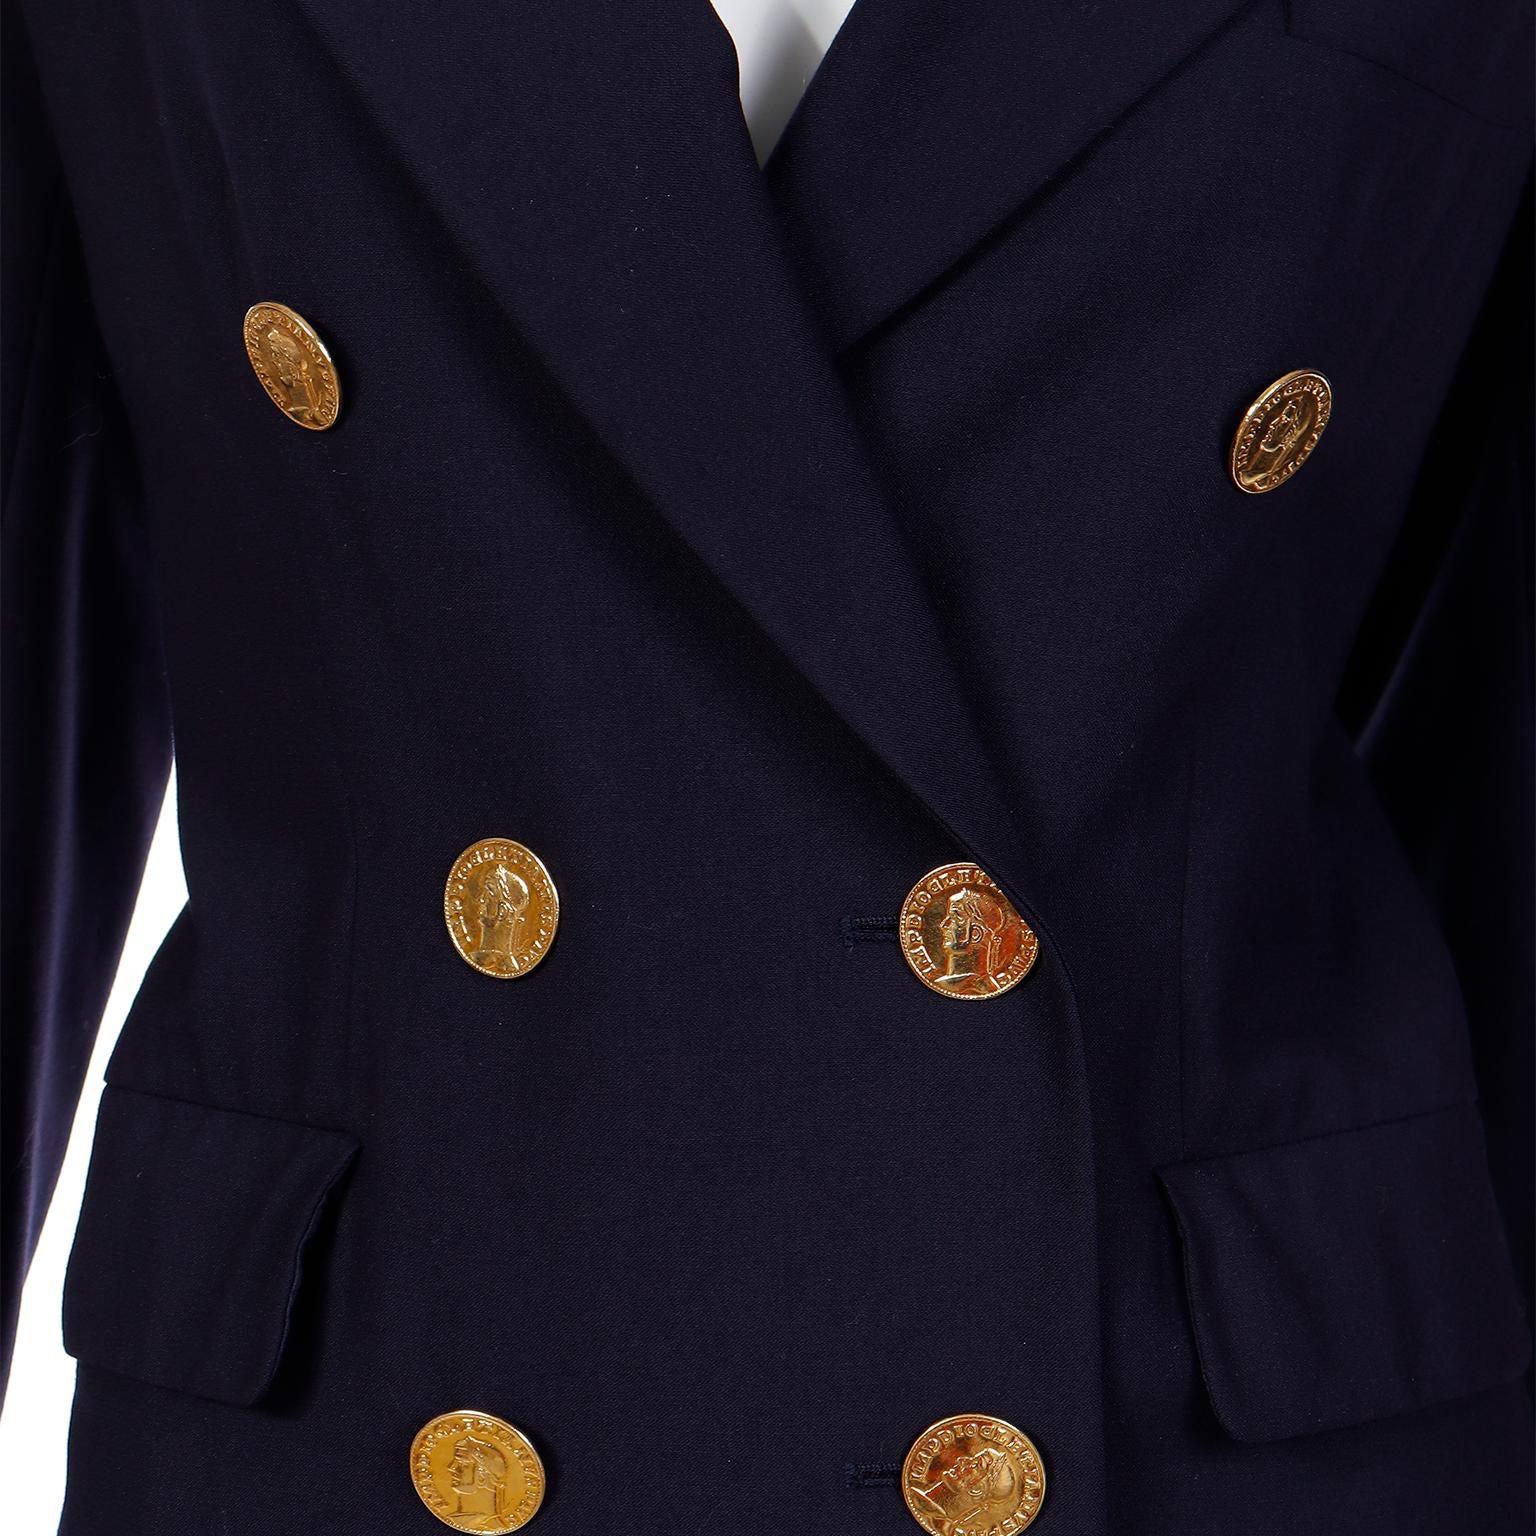 Yves Saint Laurent 1991 Navy Blue Wool Blazer Jacket w Faux Gold Coin Buttons For Sale 2